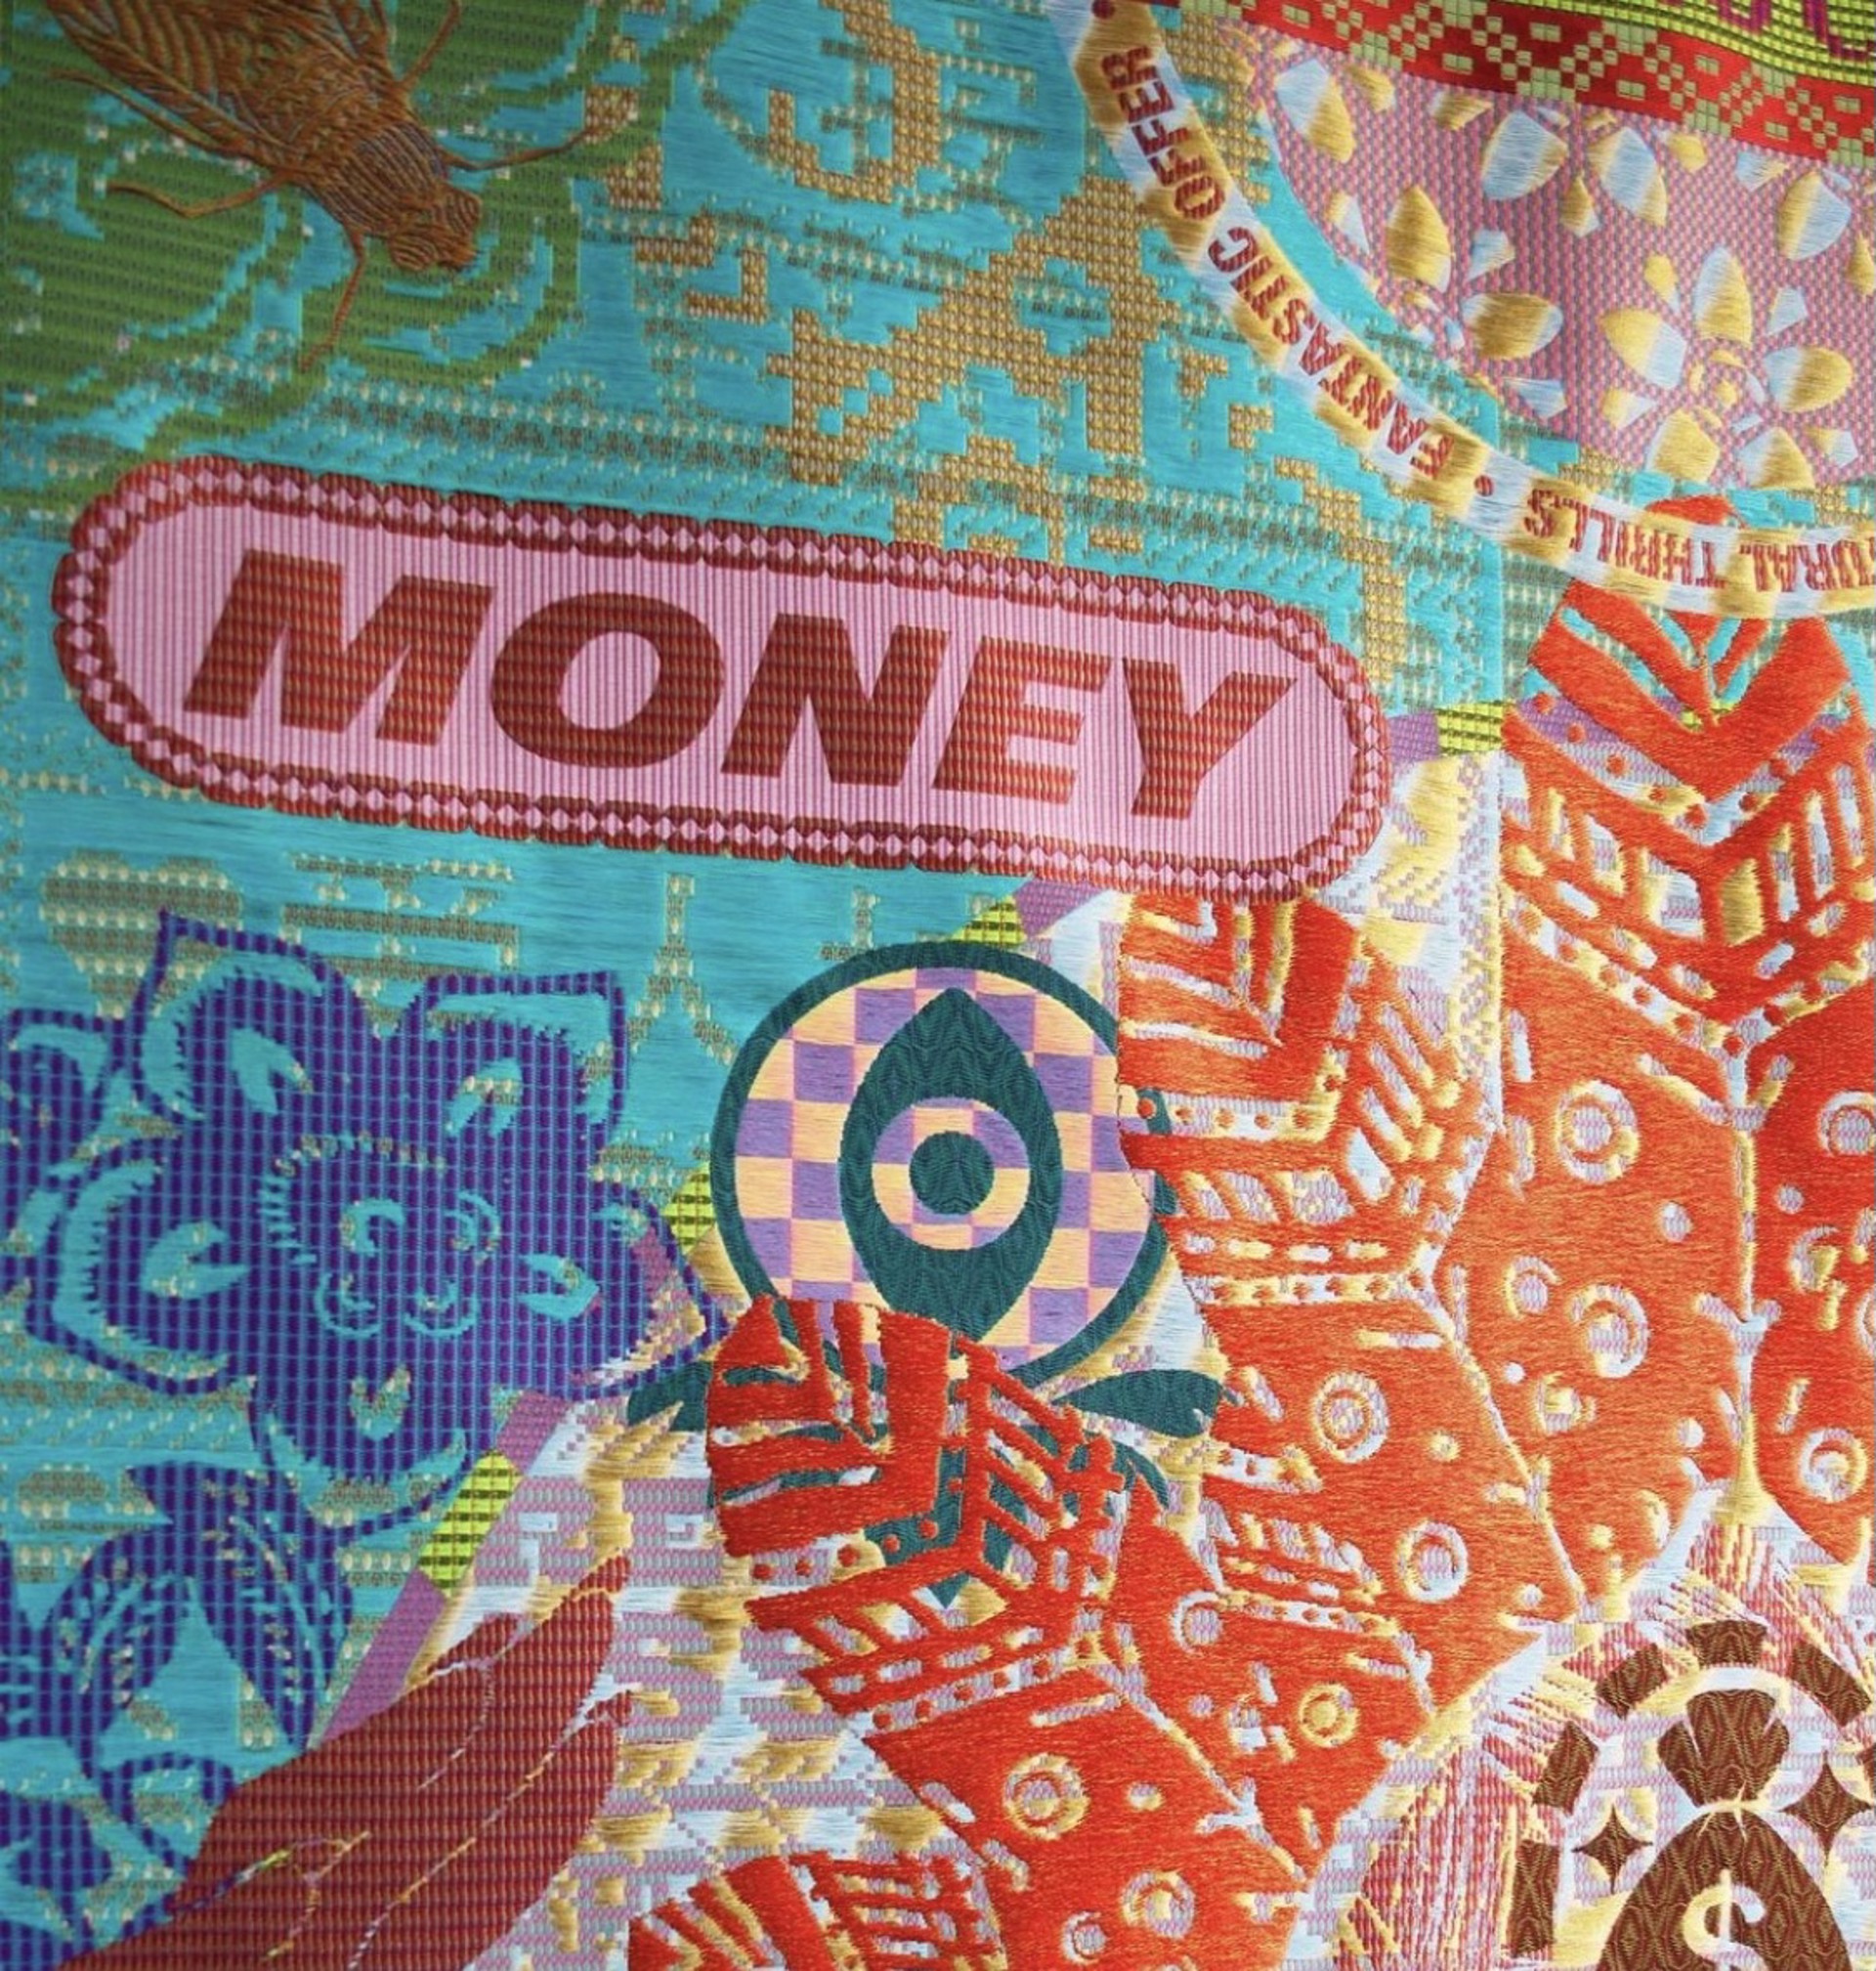 Money Minded (Woven Poster #07) by Marcos Kueh